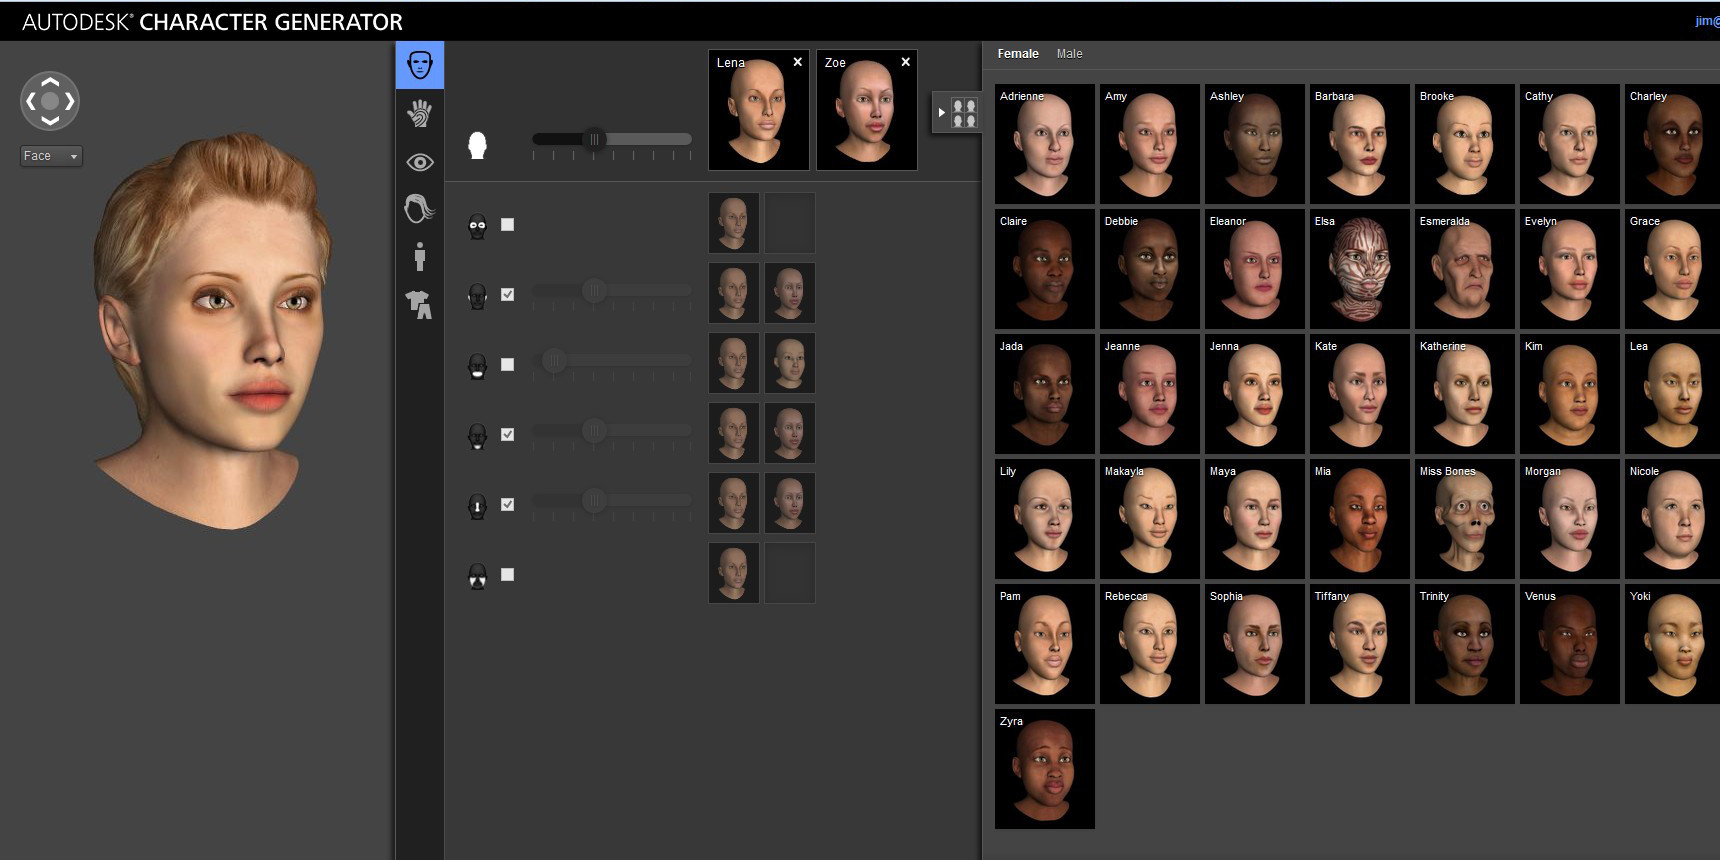 Autodesk rolls out Autodesk Character Generator | CG Channel